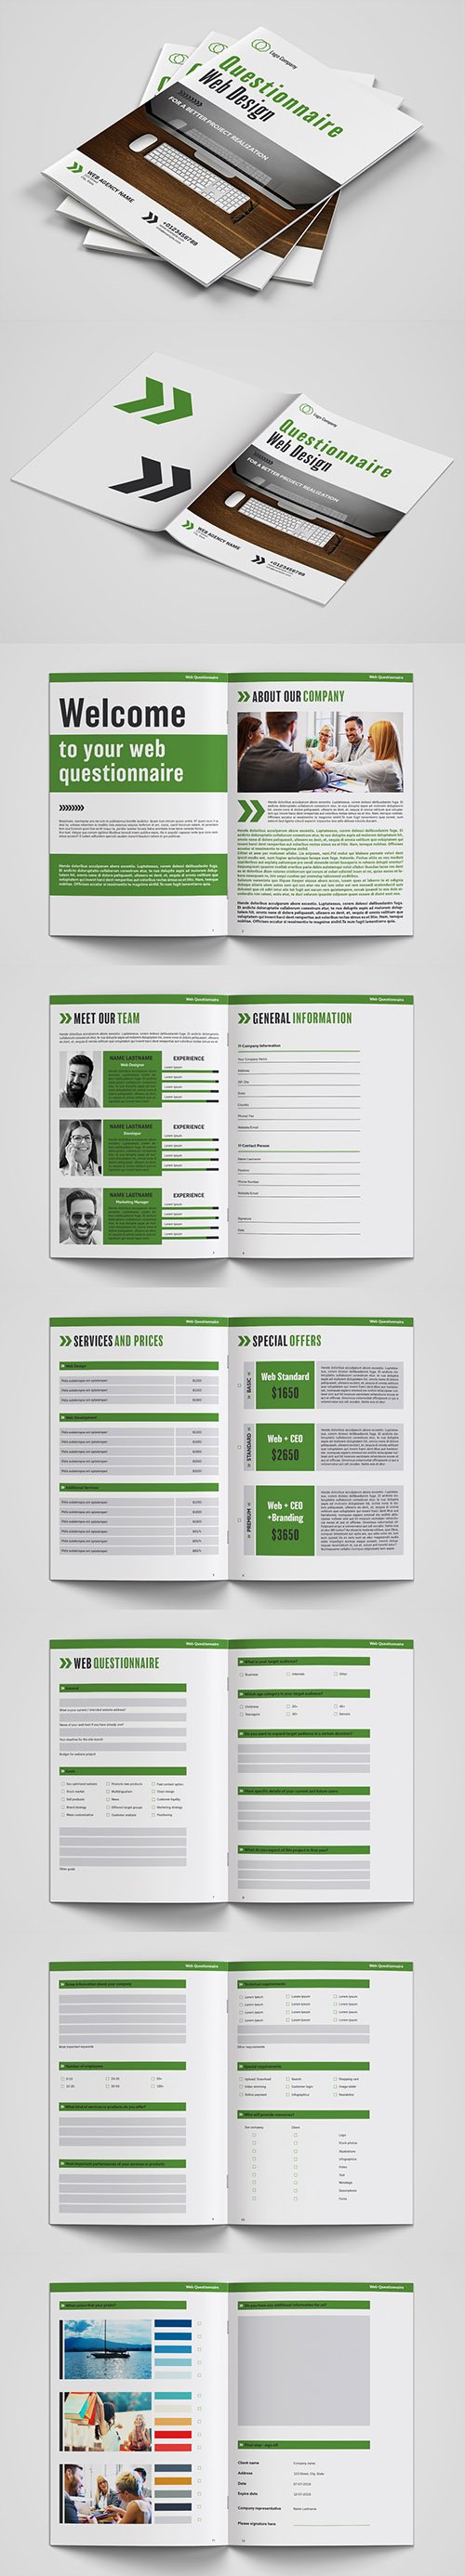 Questionnaire Layout with Green Accents